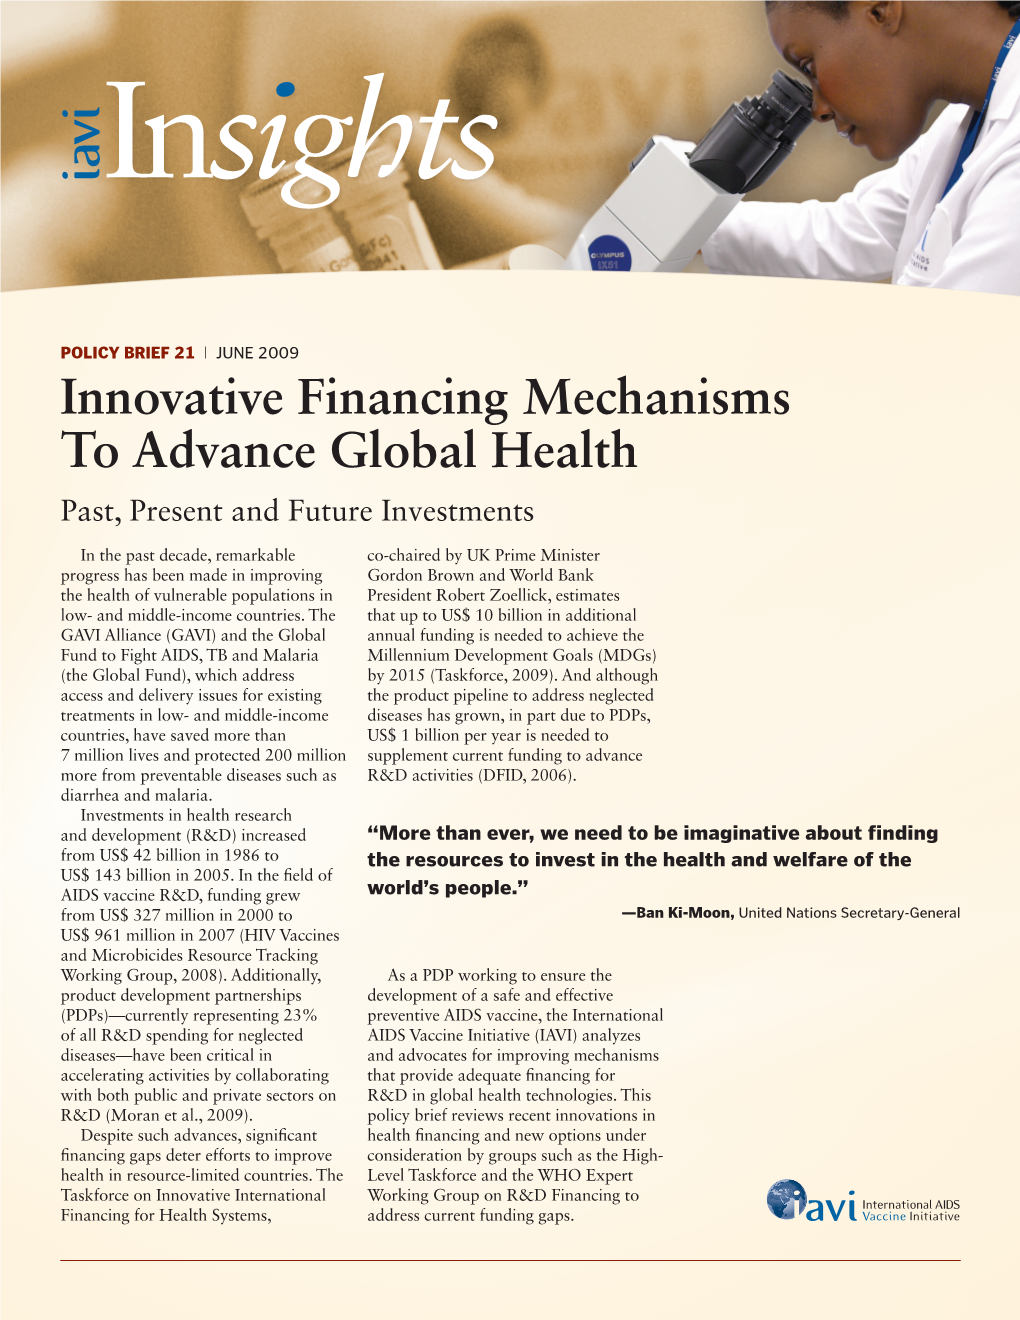 Innovative Financing Mechanisms to Advance Global Health Past, Present and Future Investments